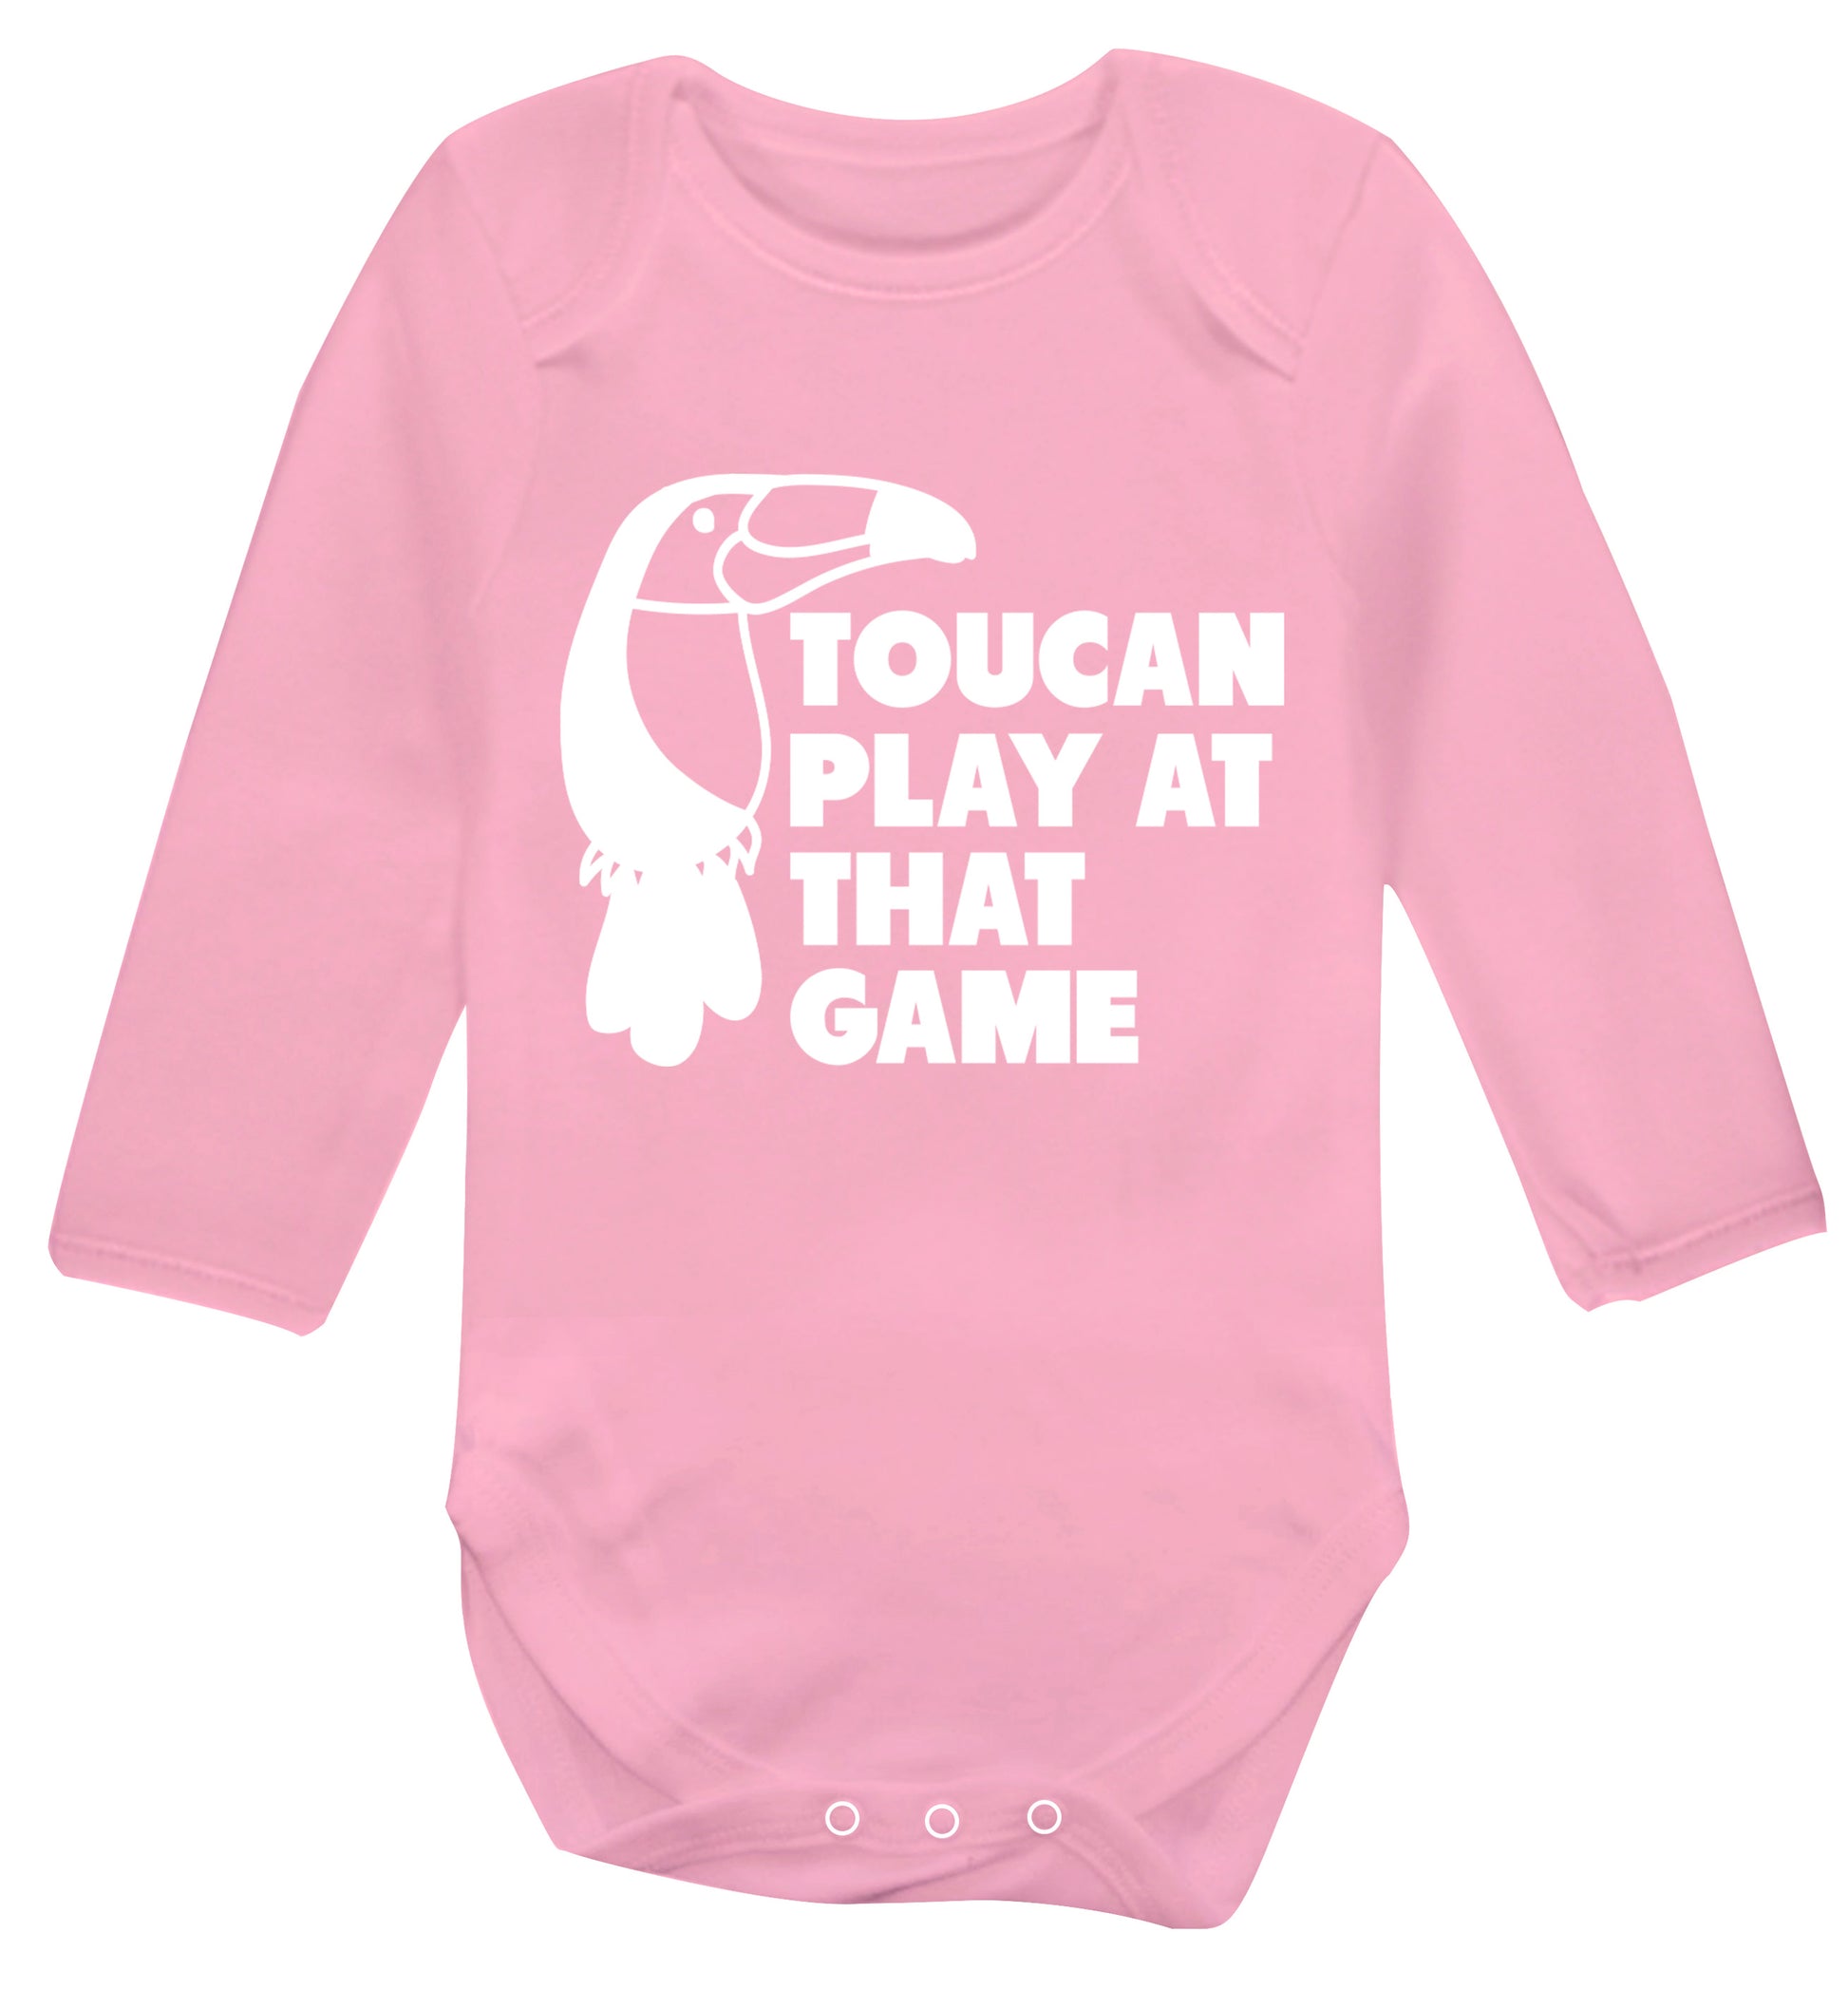 Toucan play at that game Baby Vest long sleeved pale pink 6-12 months